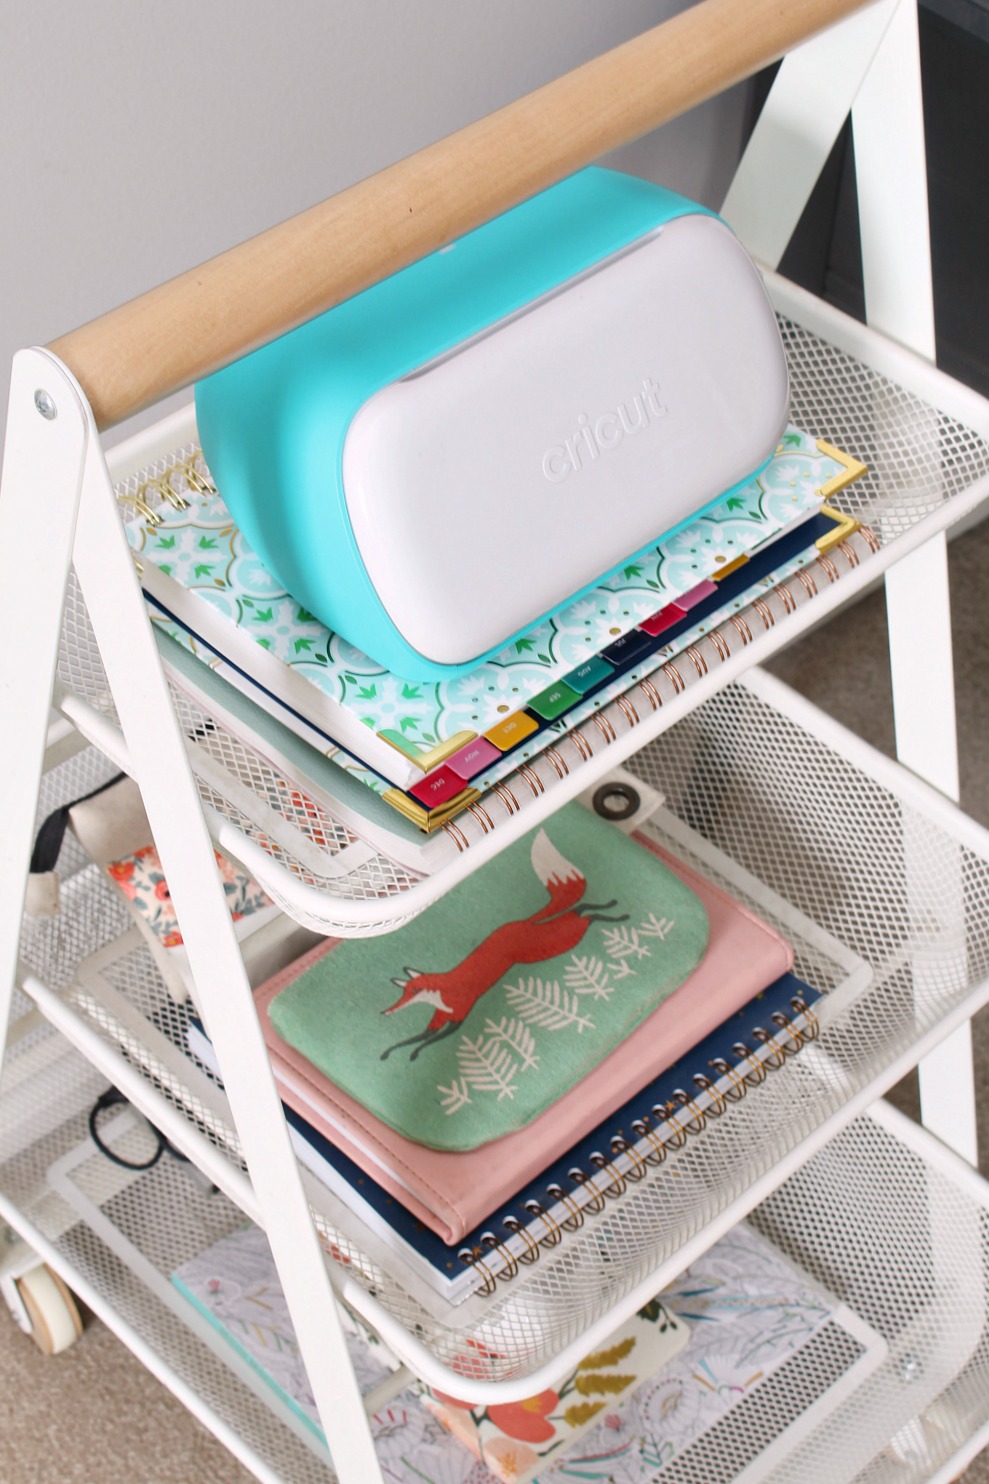 Cricut Joy: Everything You Need to Know